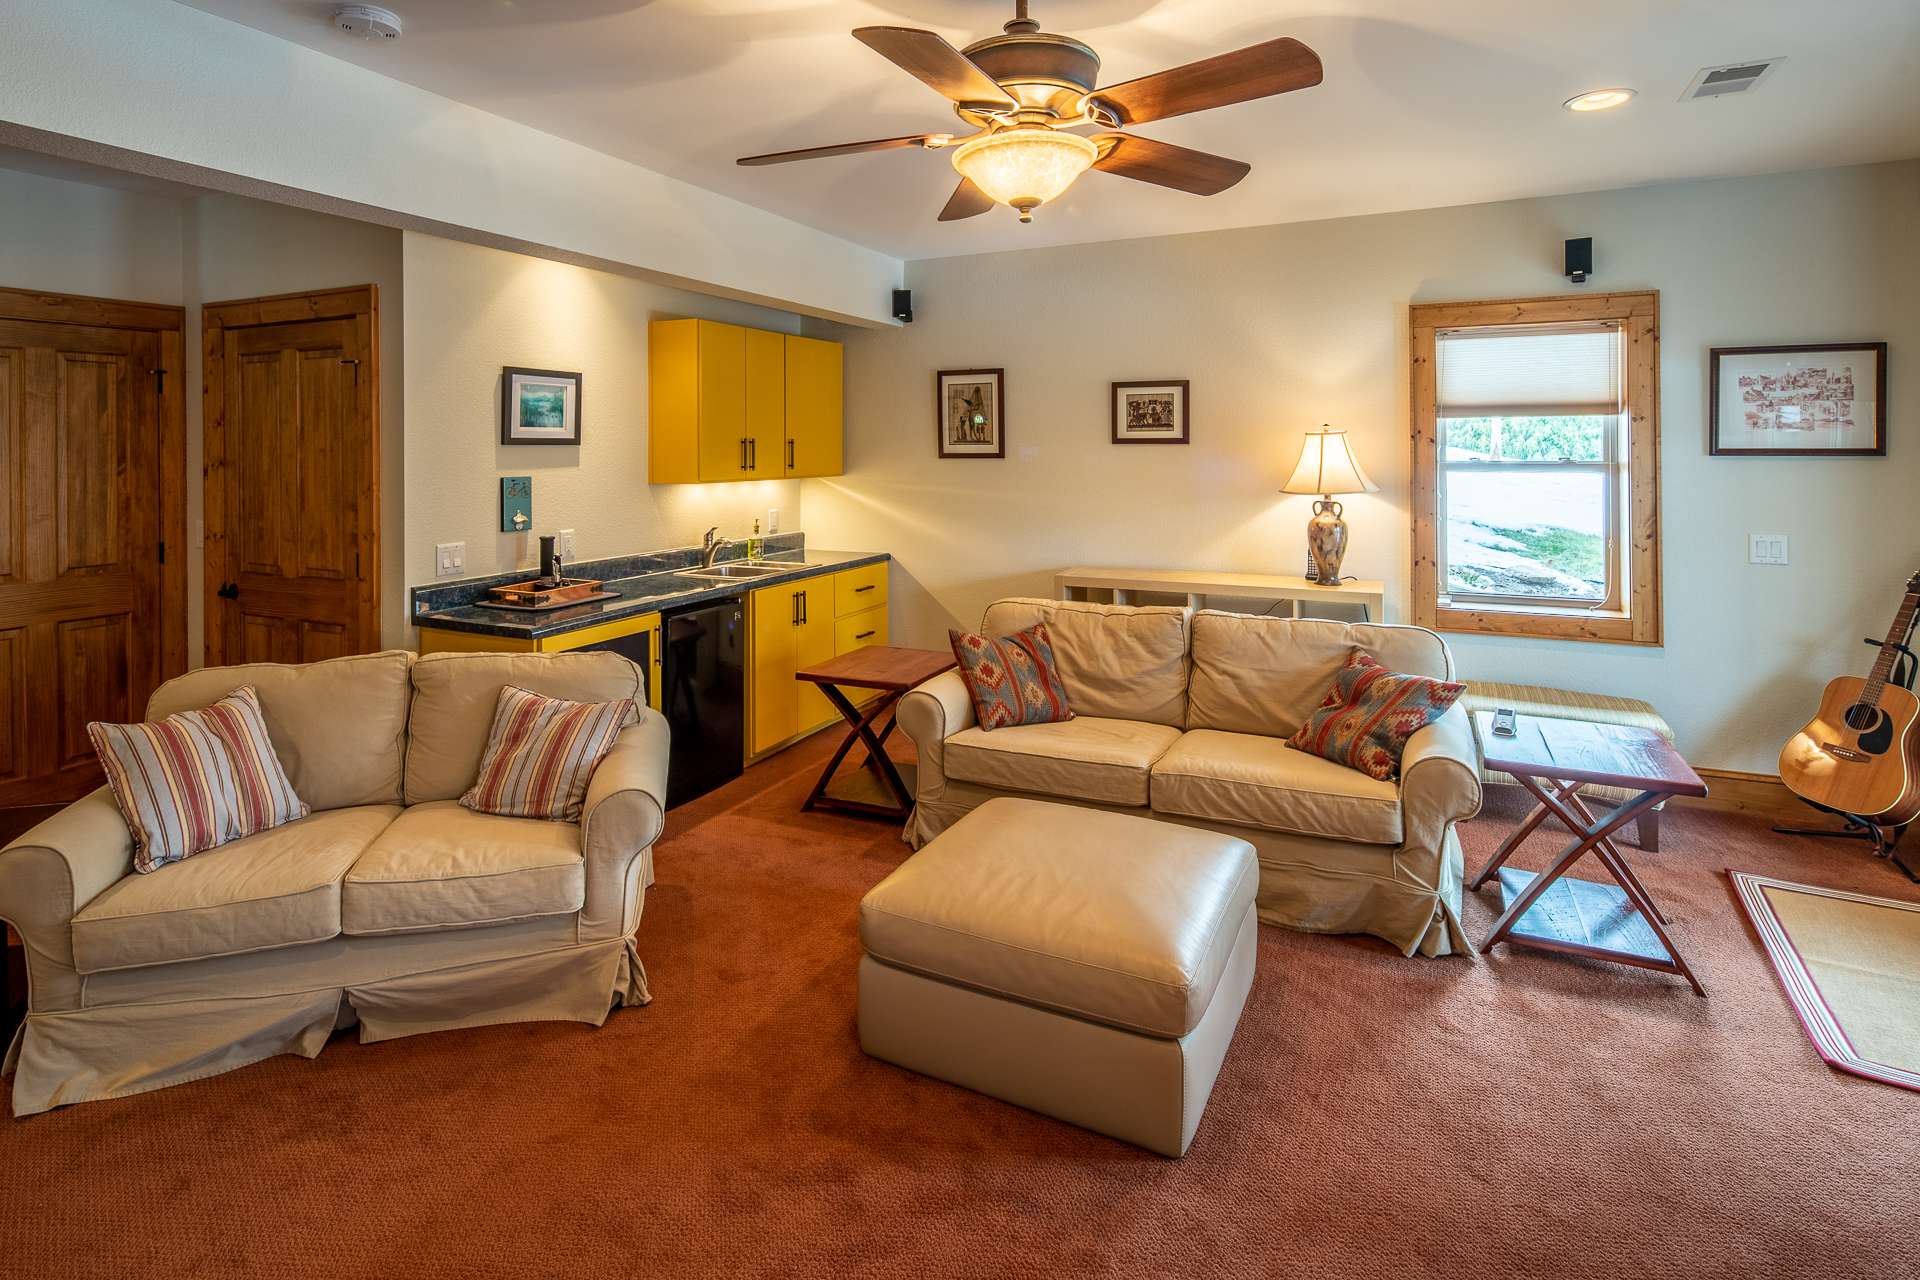 Includes wet bar and mini fridge as well as…